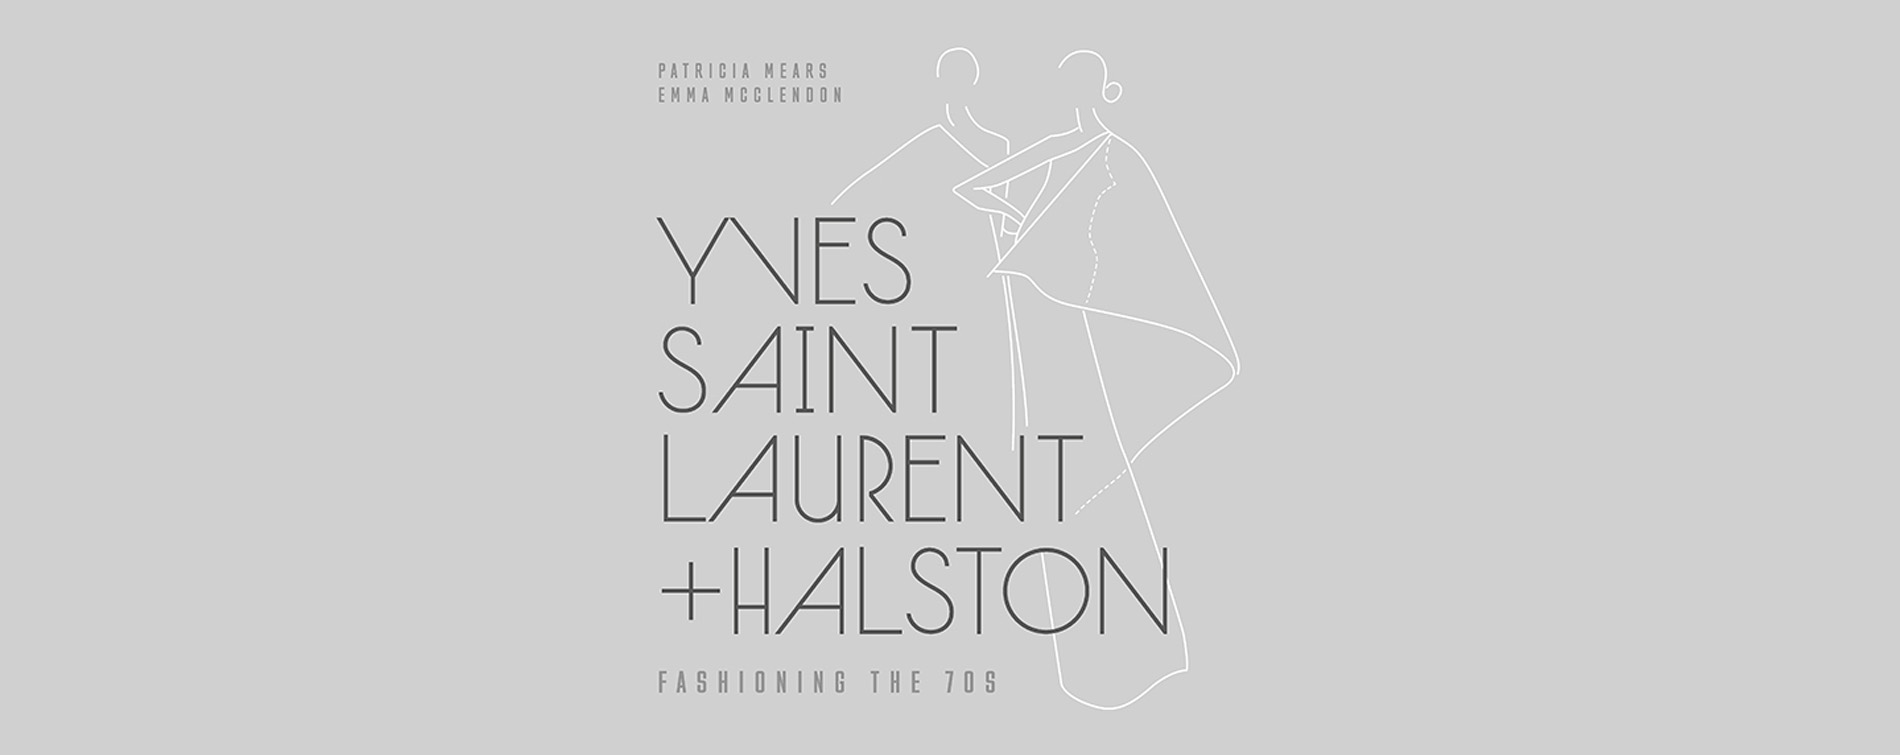 ysl + halston: fashioning the 70s book cover